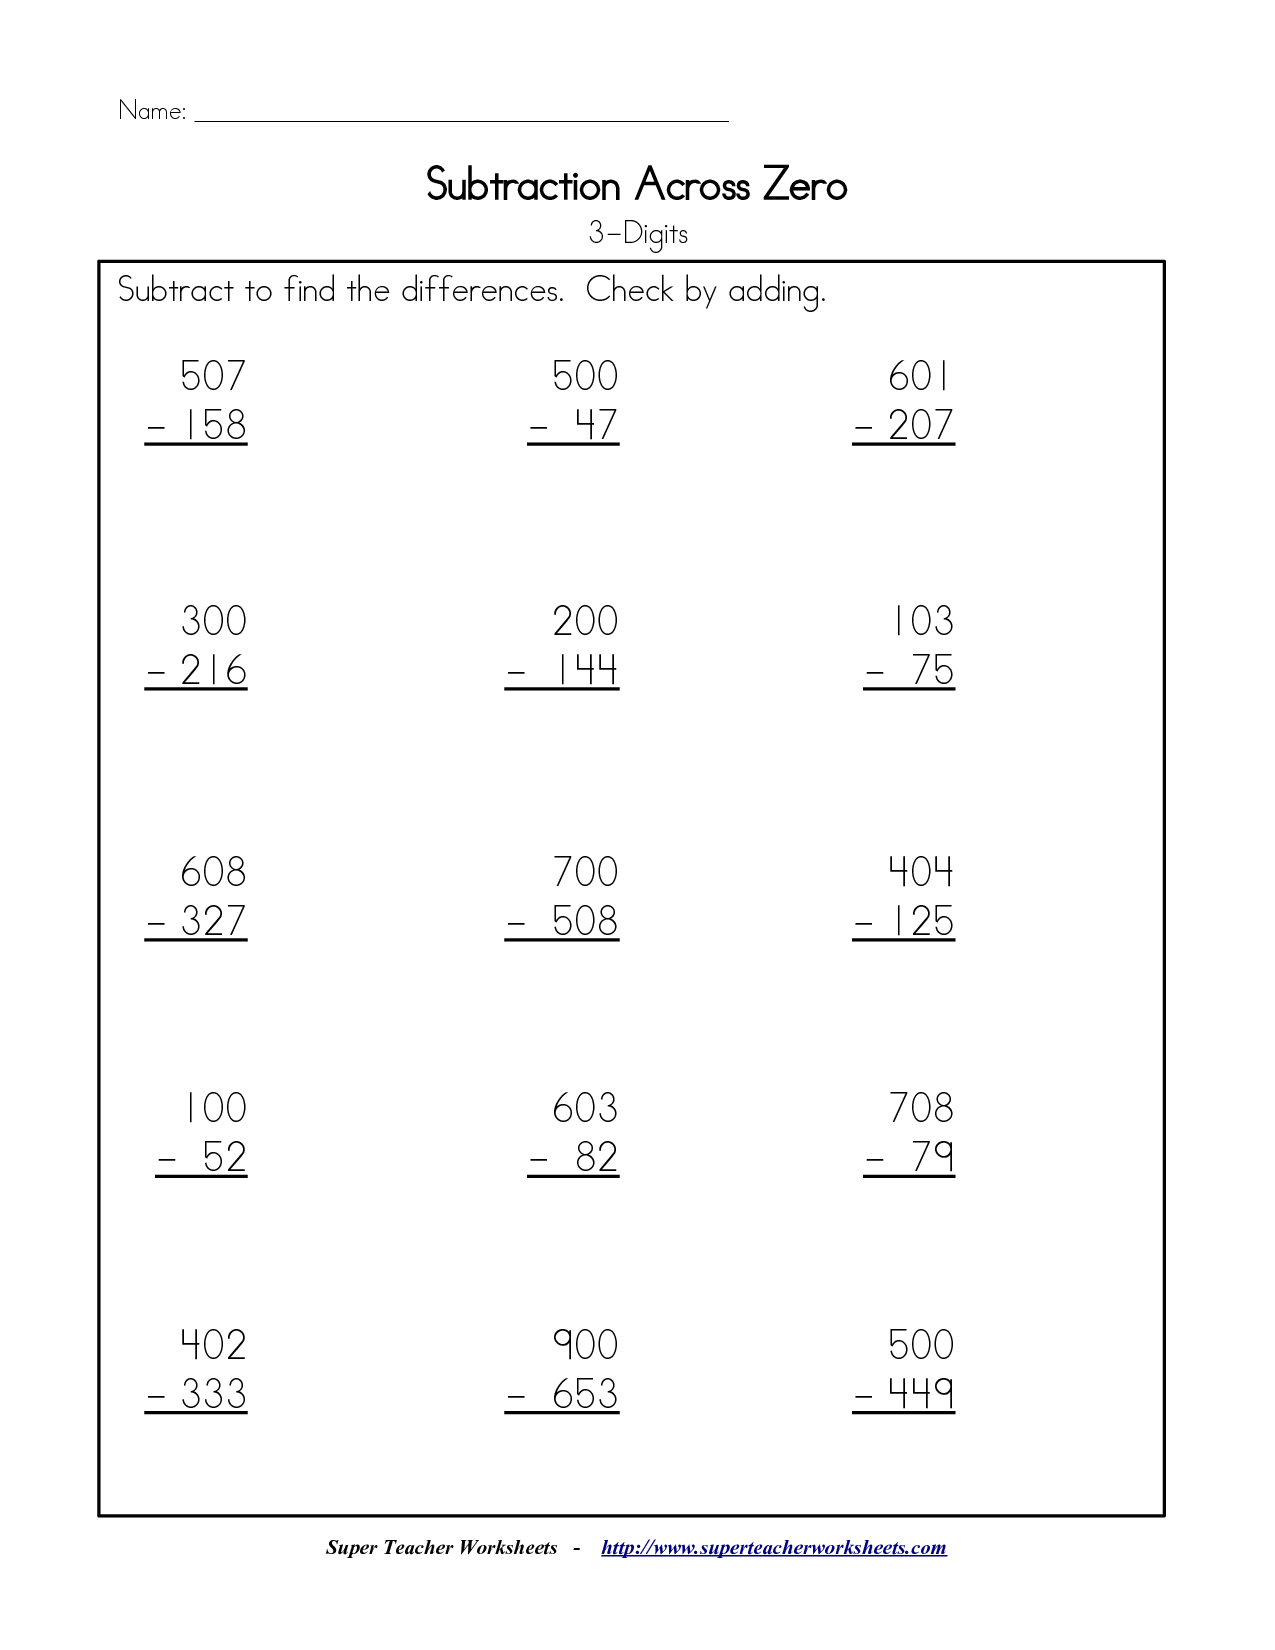 13 Best Images of Super Teacher Worksheets Math Answers